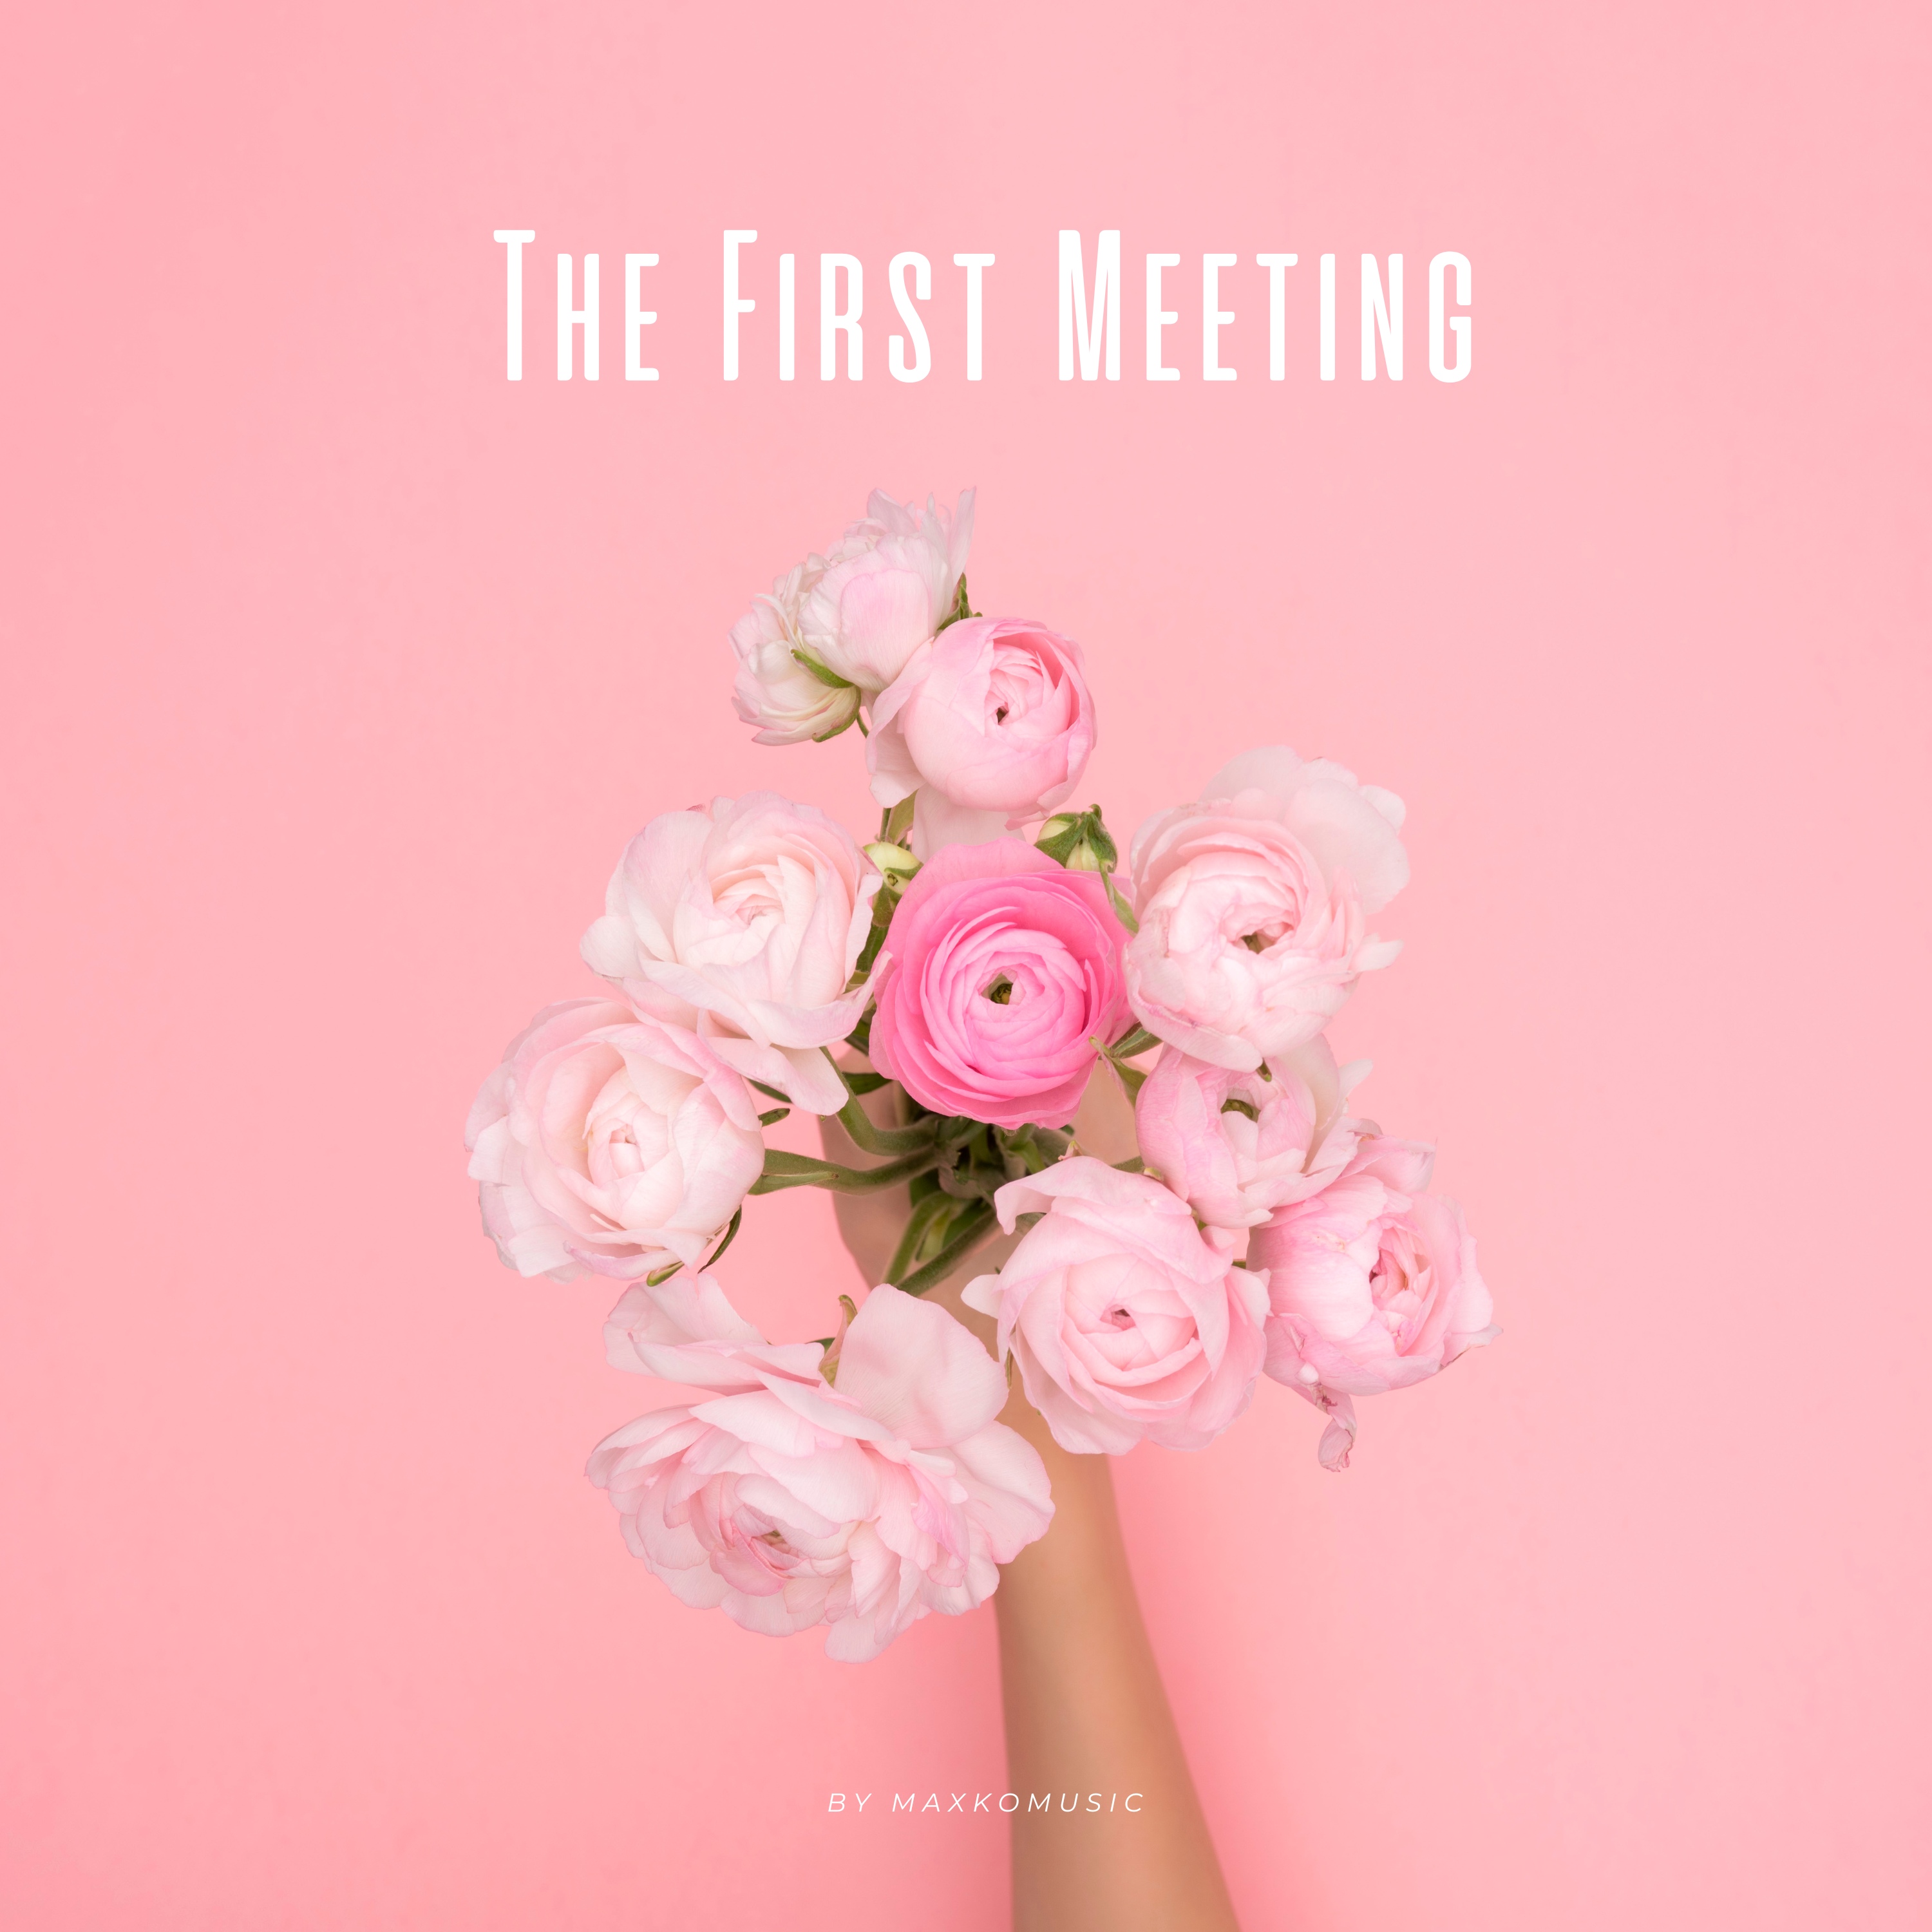 The First Meeting